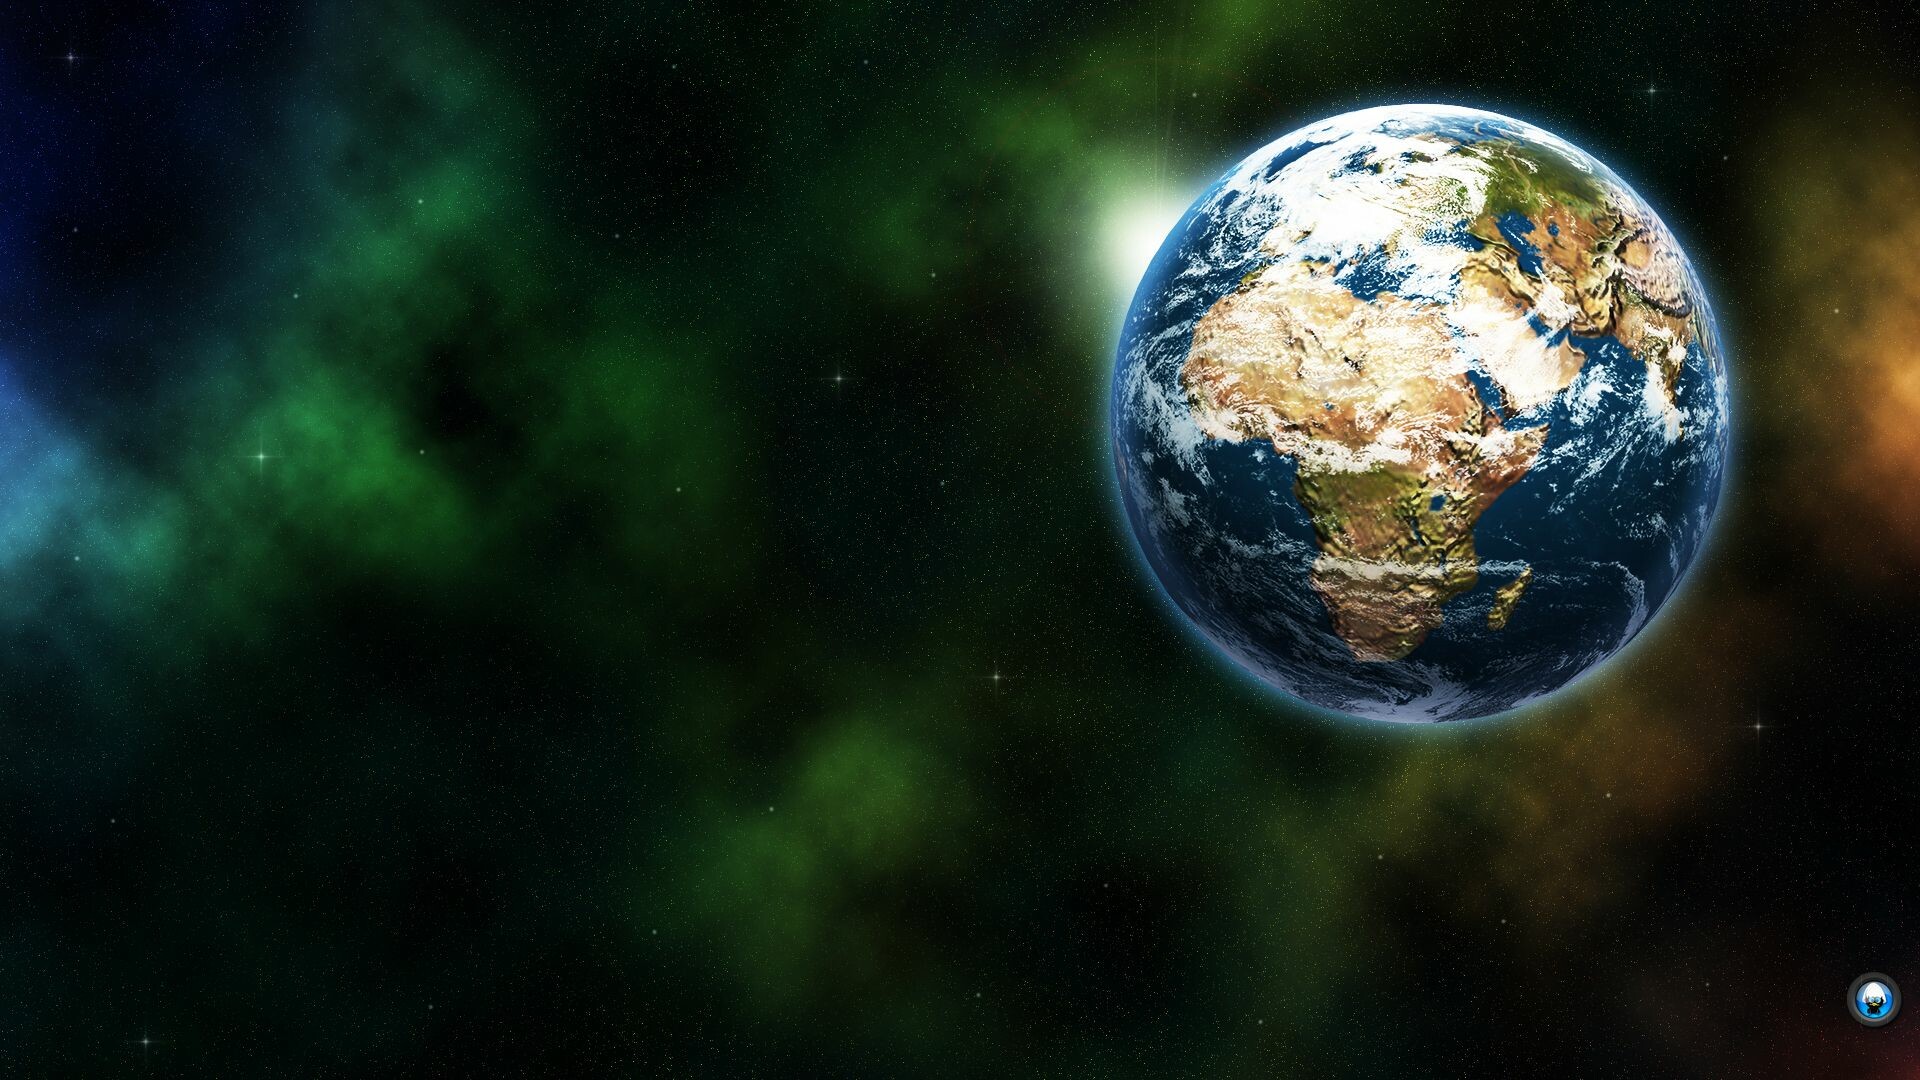 Planet Earth Wallpapers, 34 Widescreen HQ Definition Wallpapers of ...